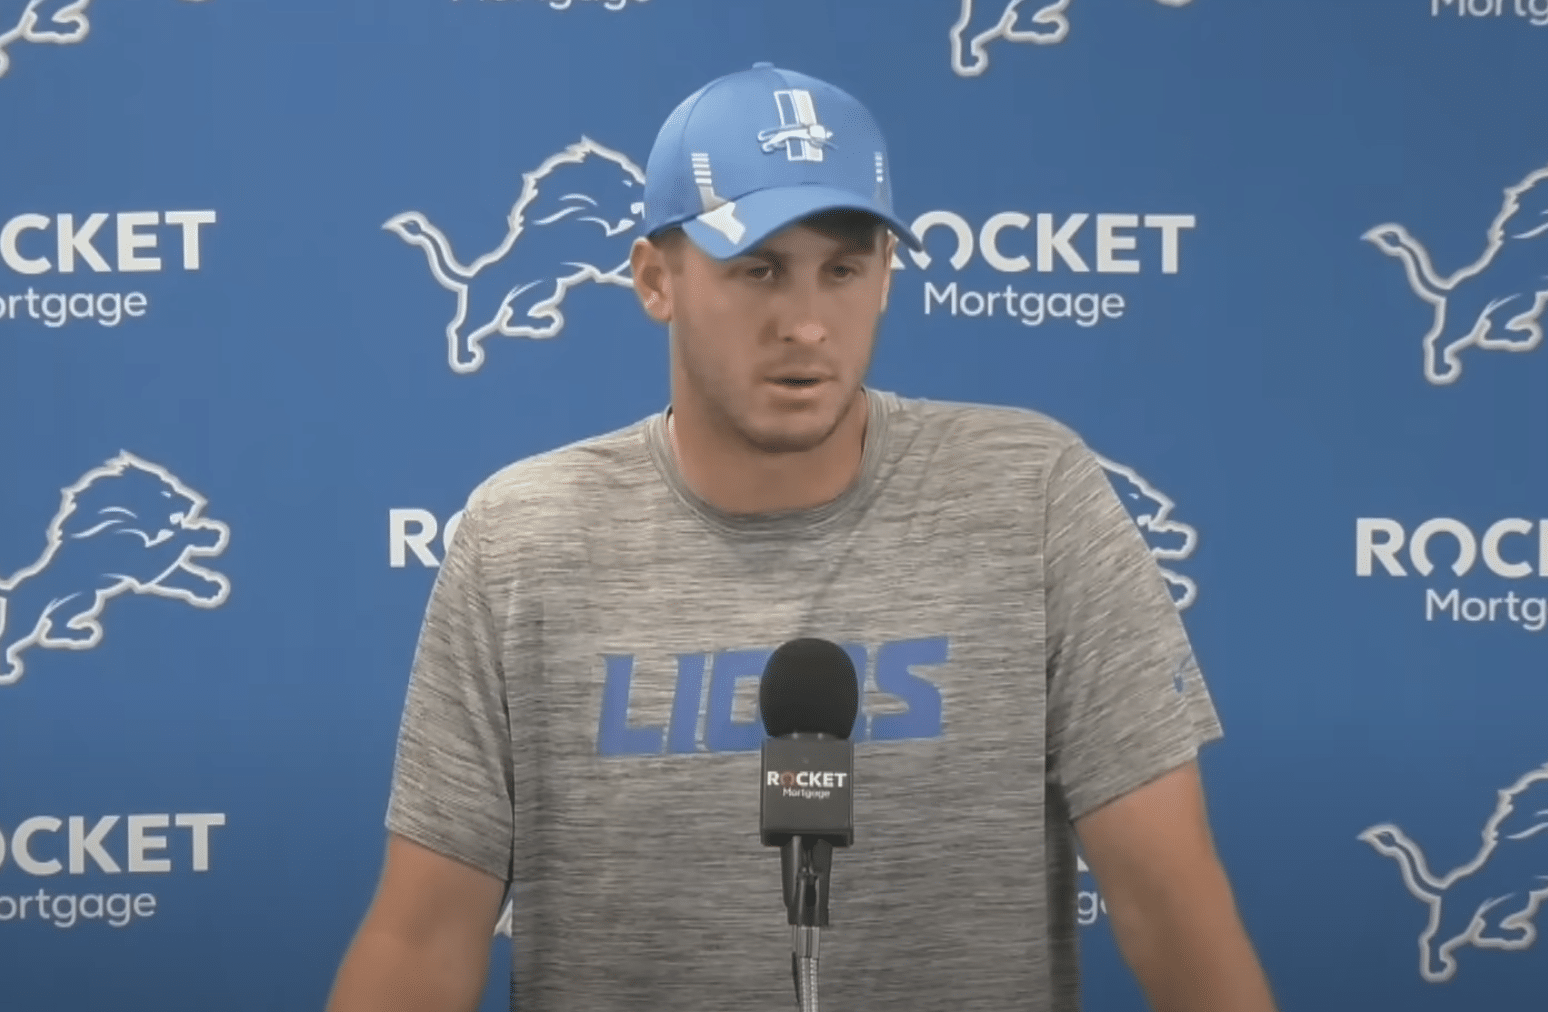 Detroit Lions are built for games Jared Goff Jared Goff comments on getting game ball